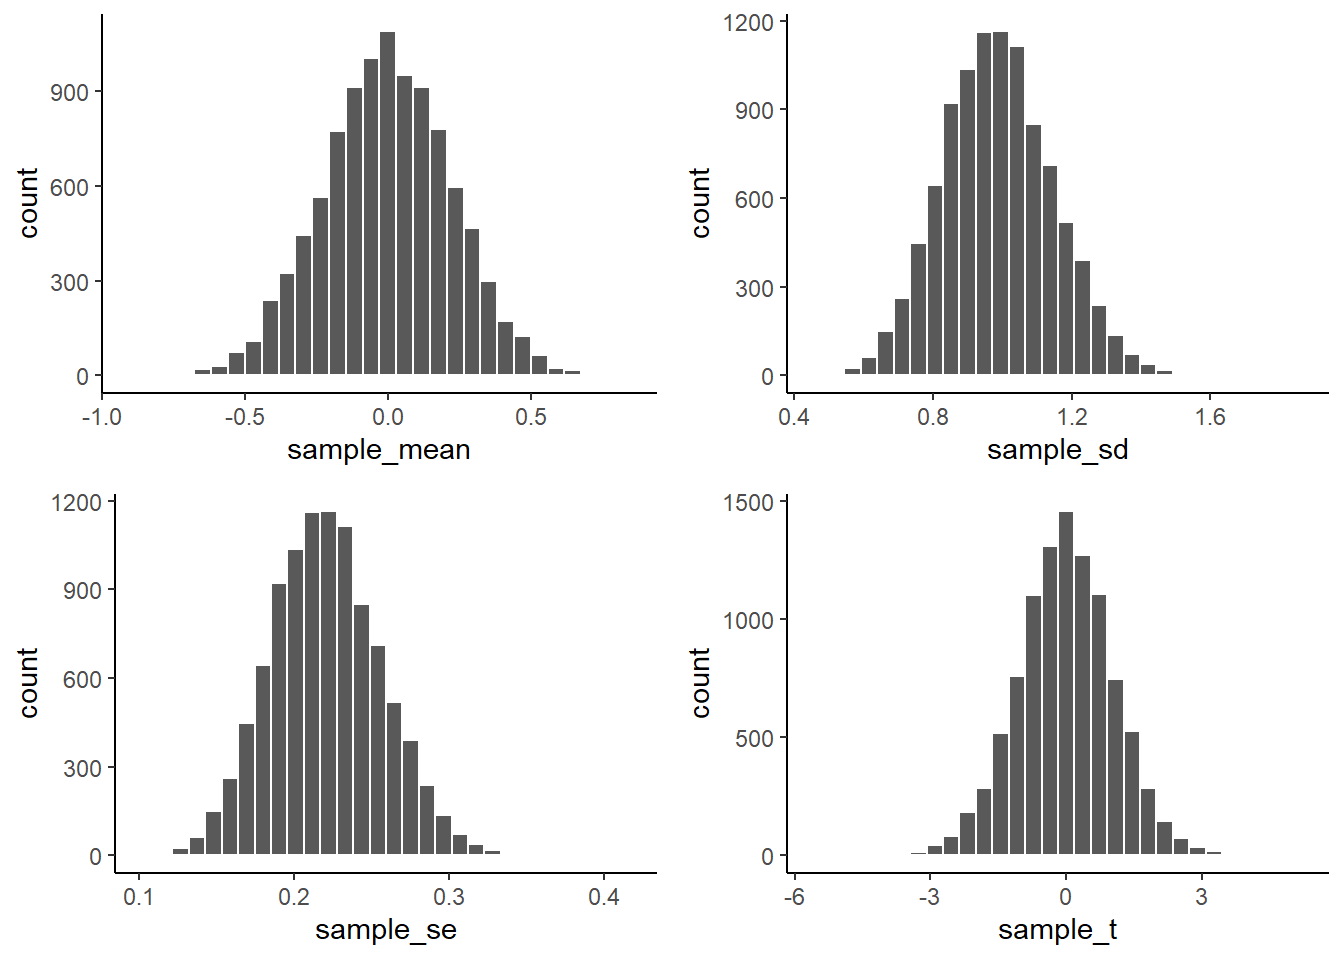 Sampling distributions for the mean, standard deviation, standard error of the mean, and t